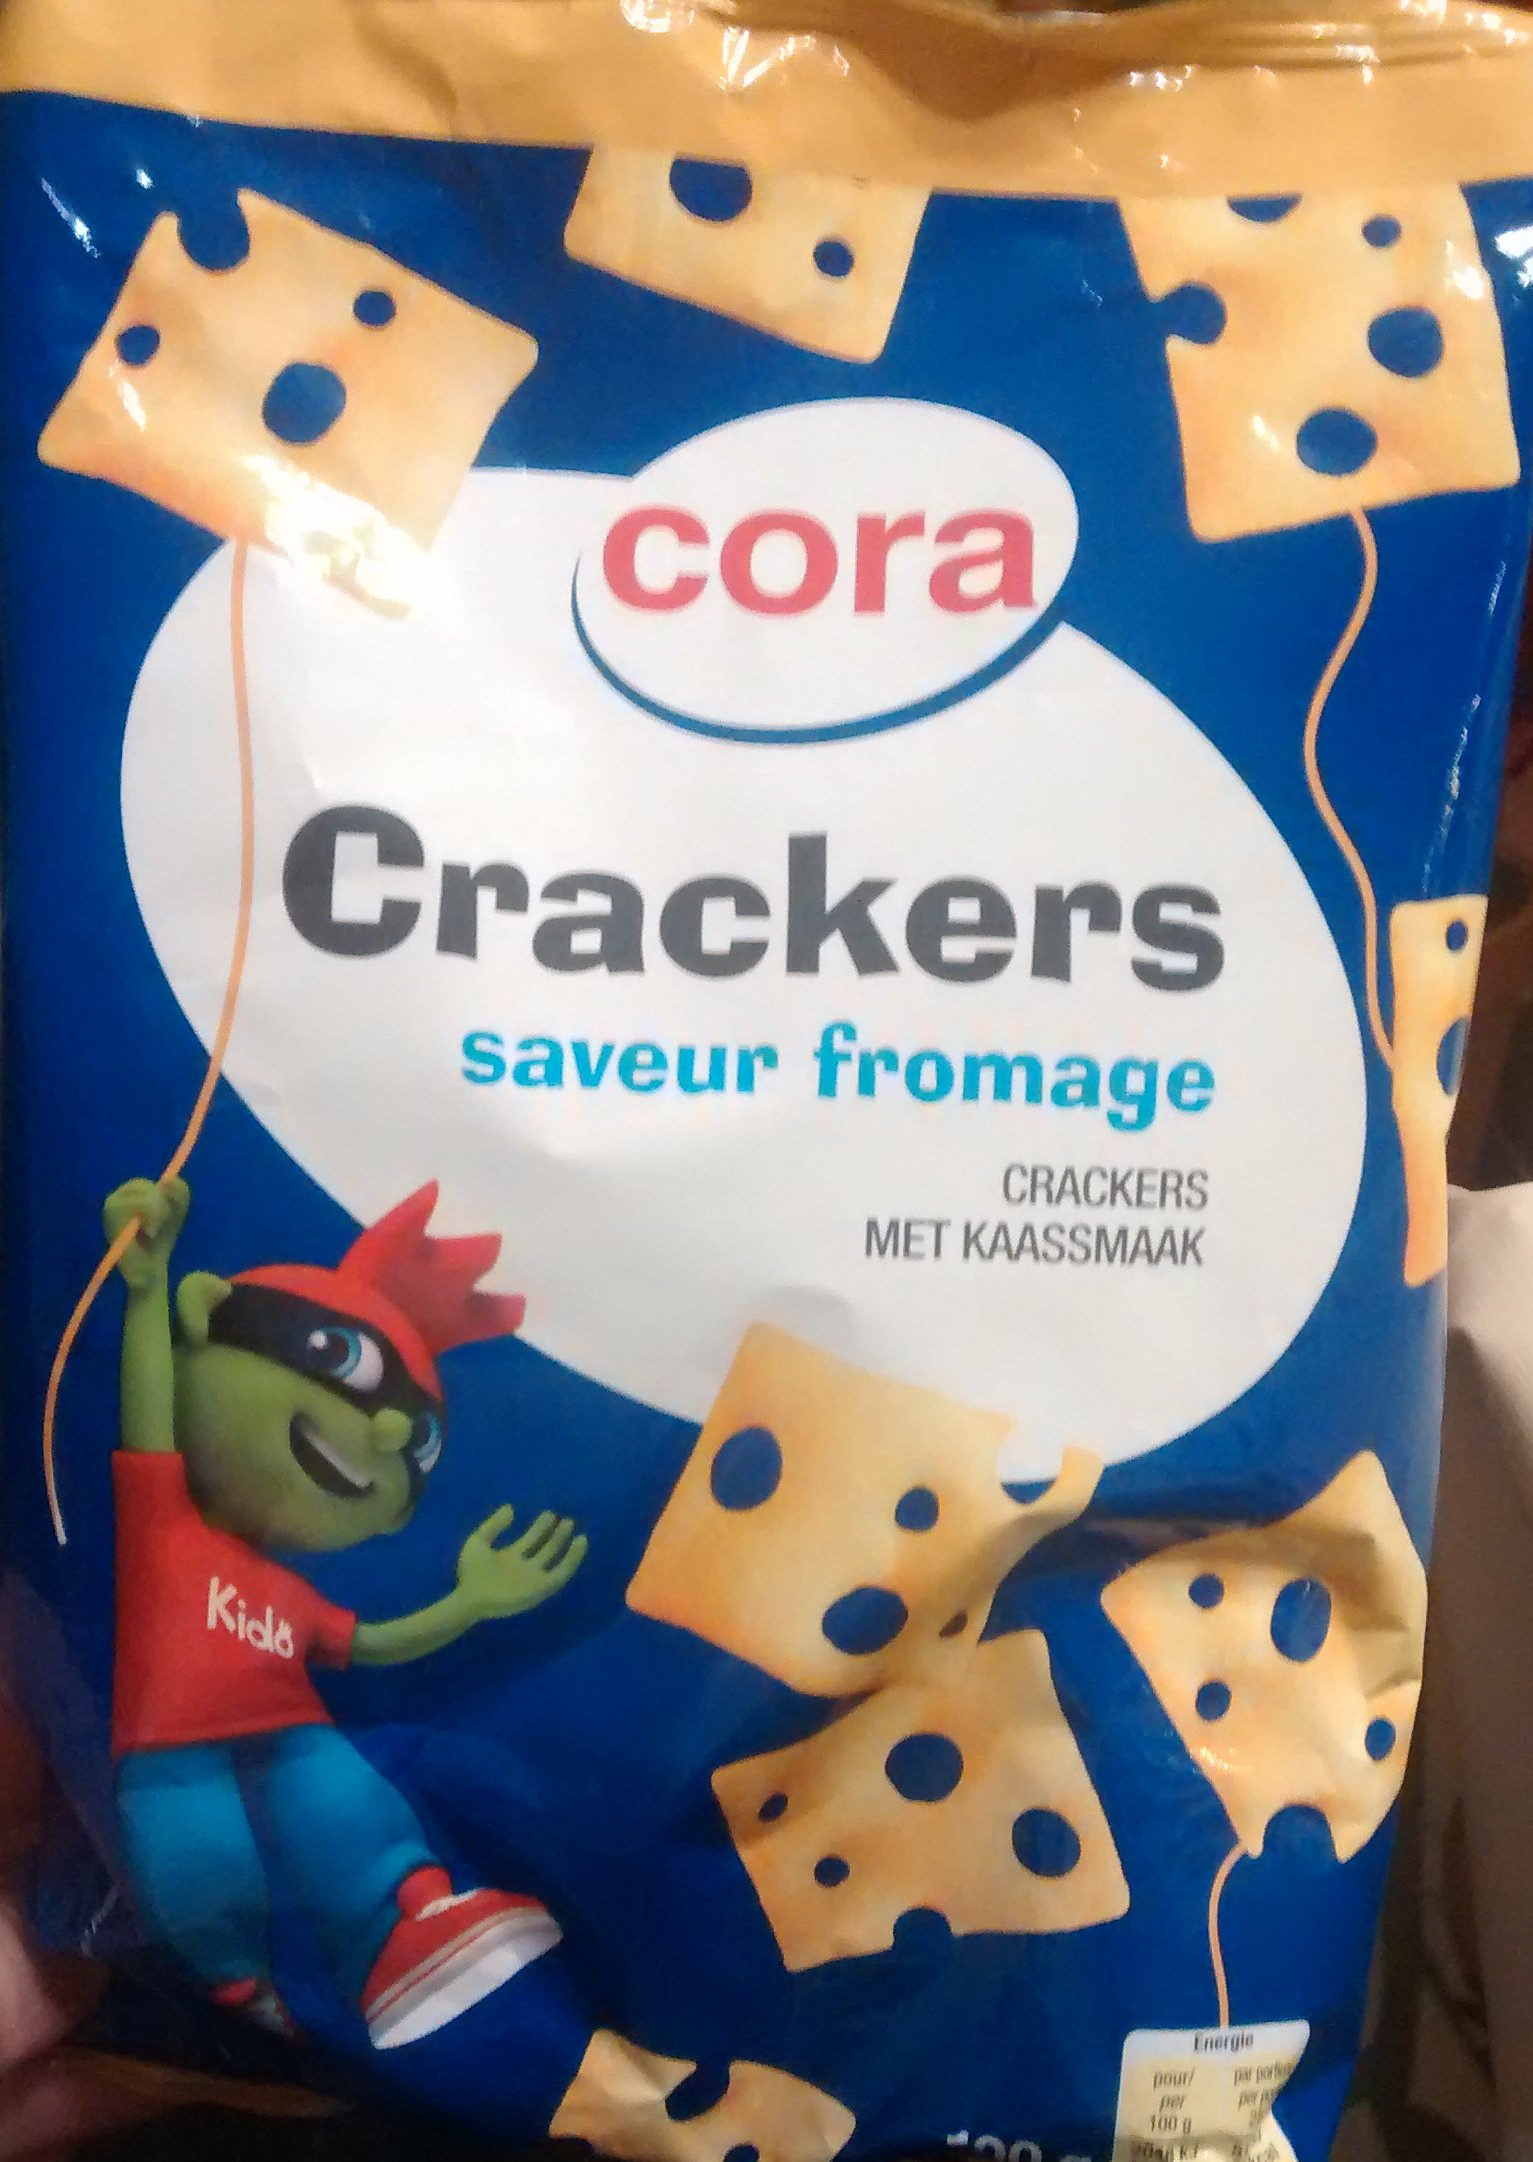 Crackers saveur fromage - Product - fr